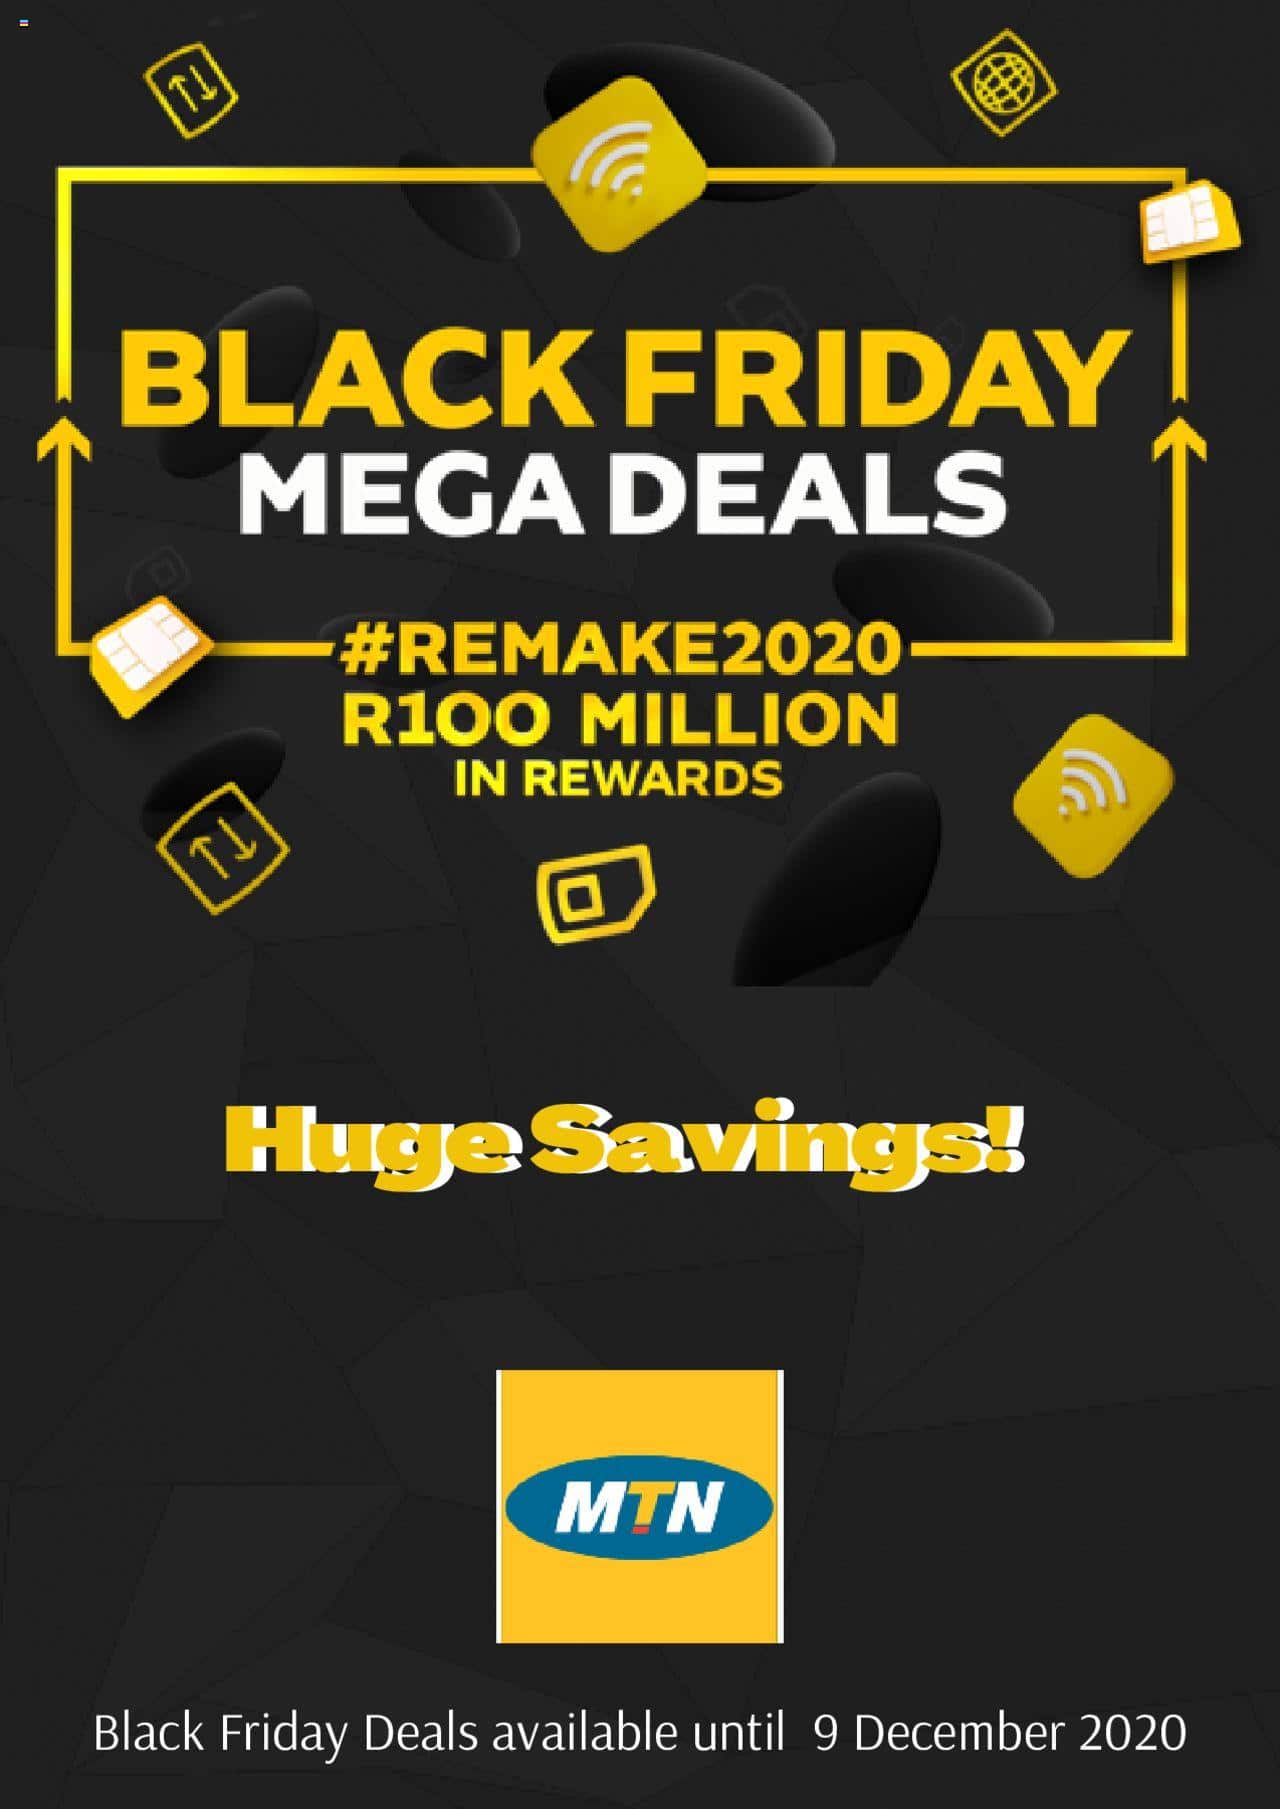 MTN Black Friday Deals & Specials 2021 - Will Thurday Deals Be Available On Black Friday